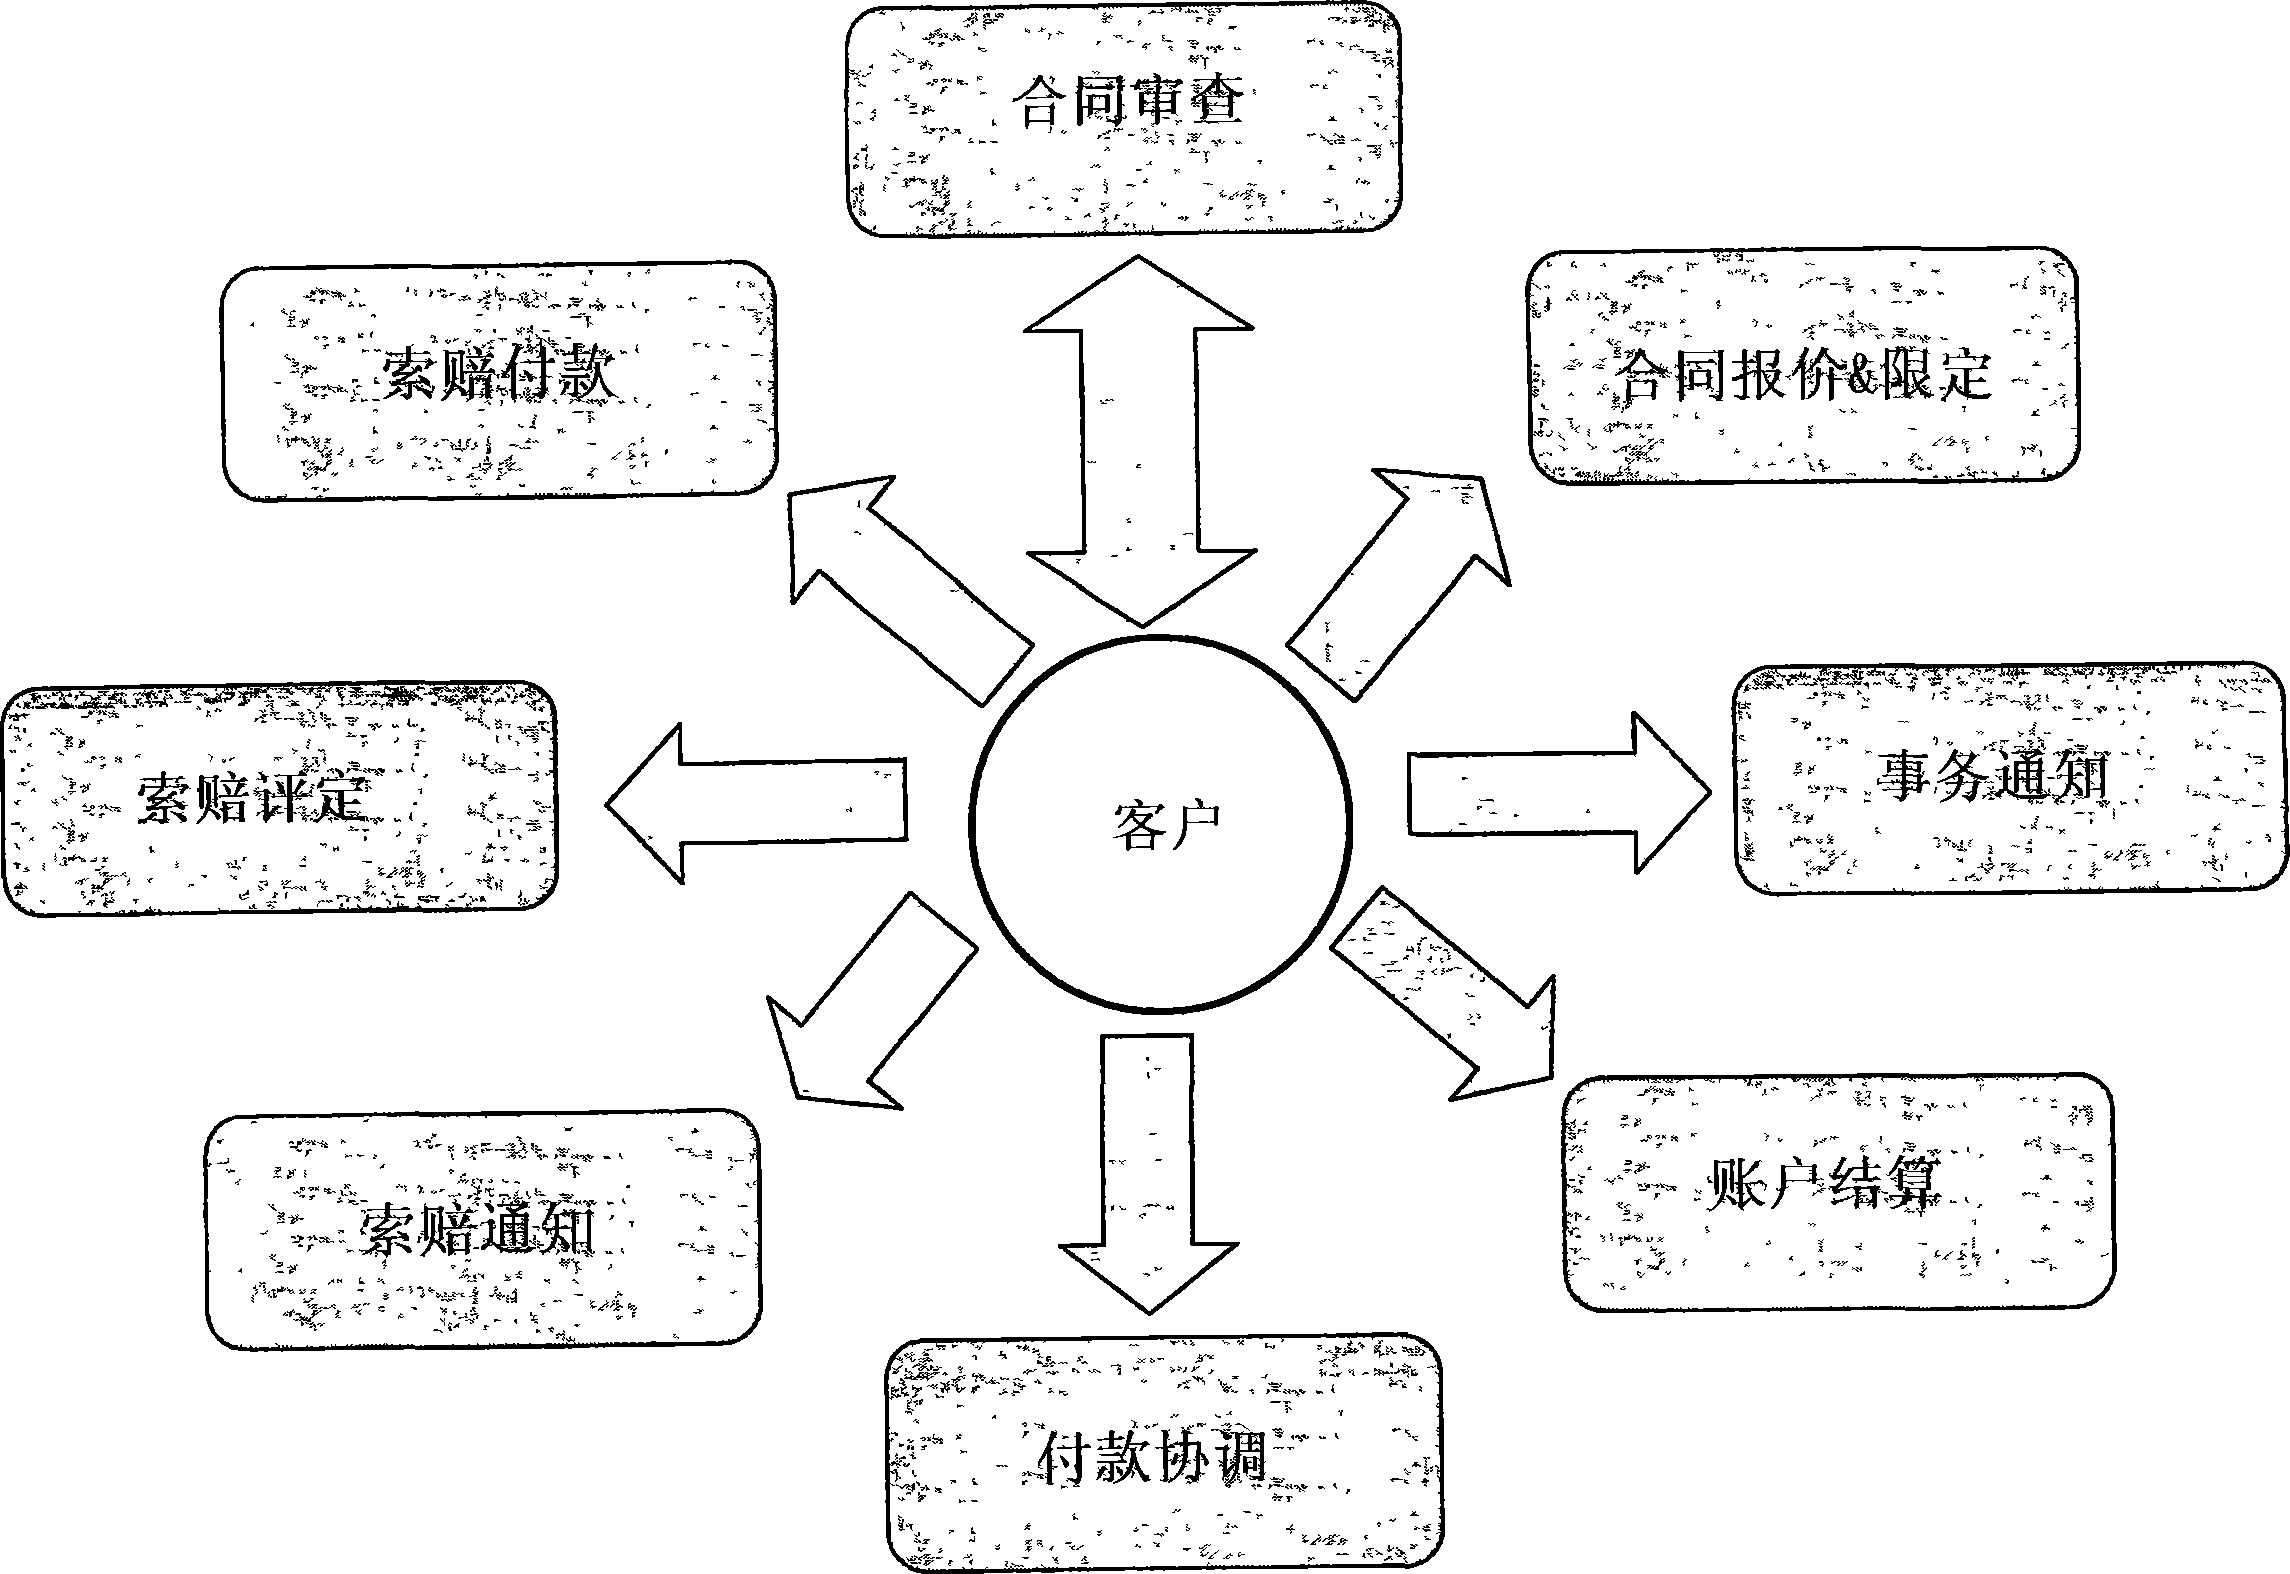 Computer-based transaction system and computer implemented method for transacting services between a service provider and a client